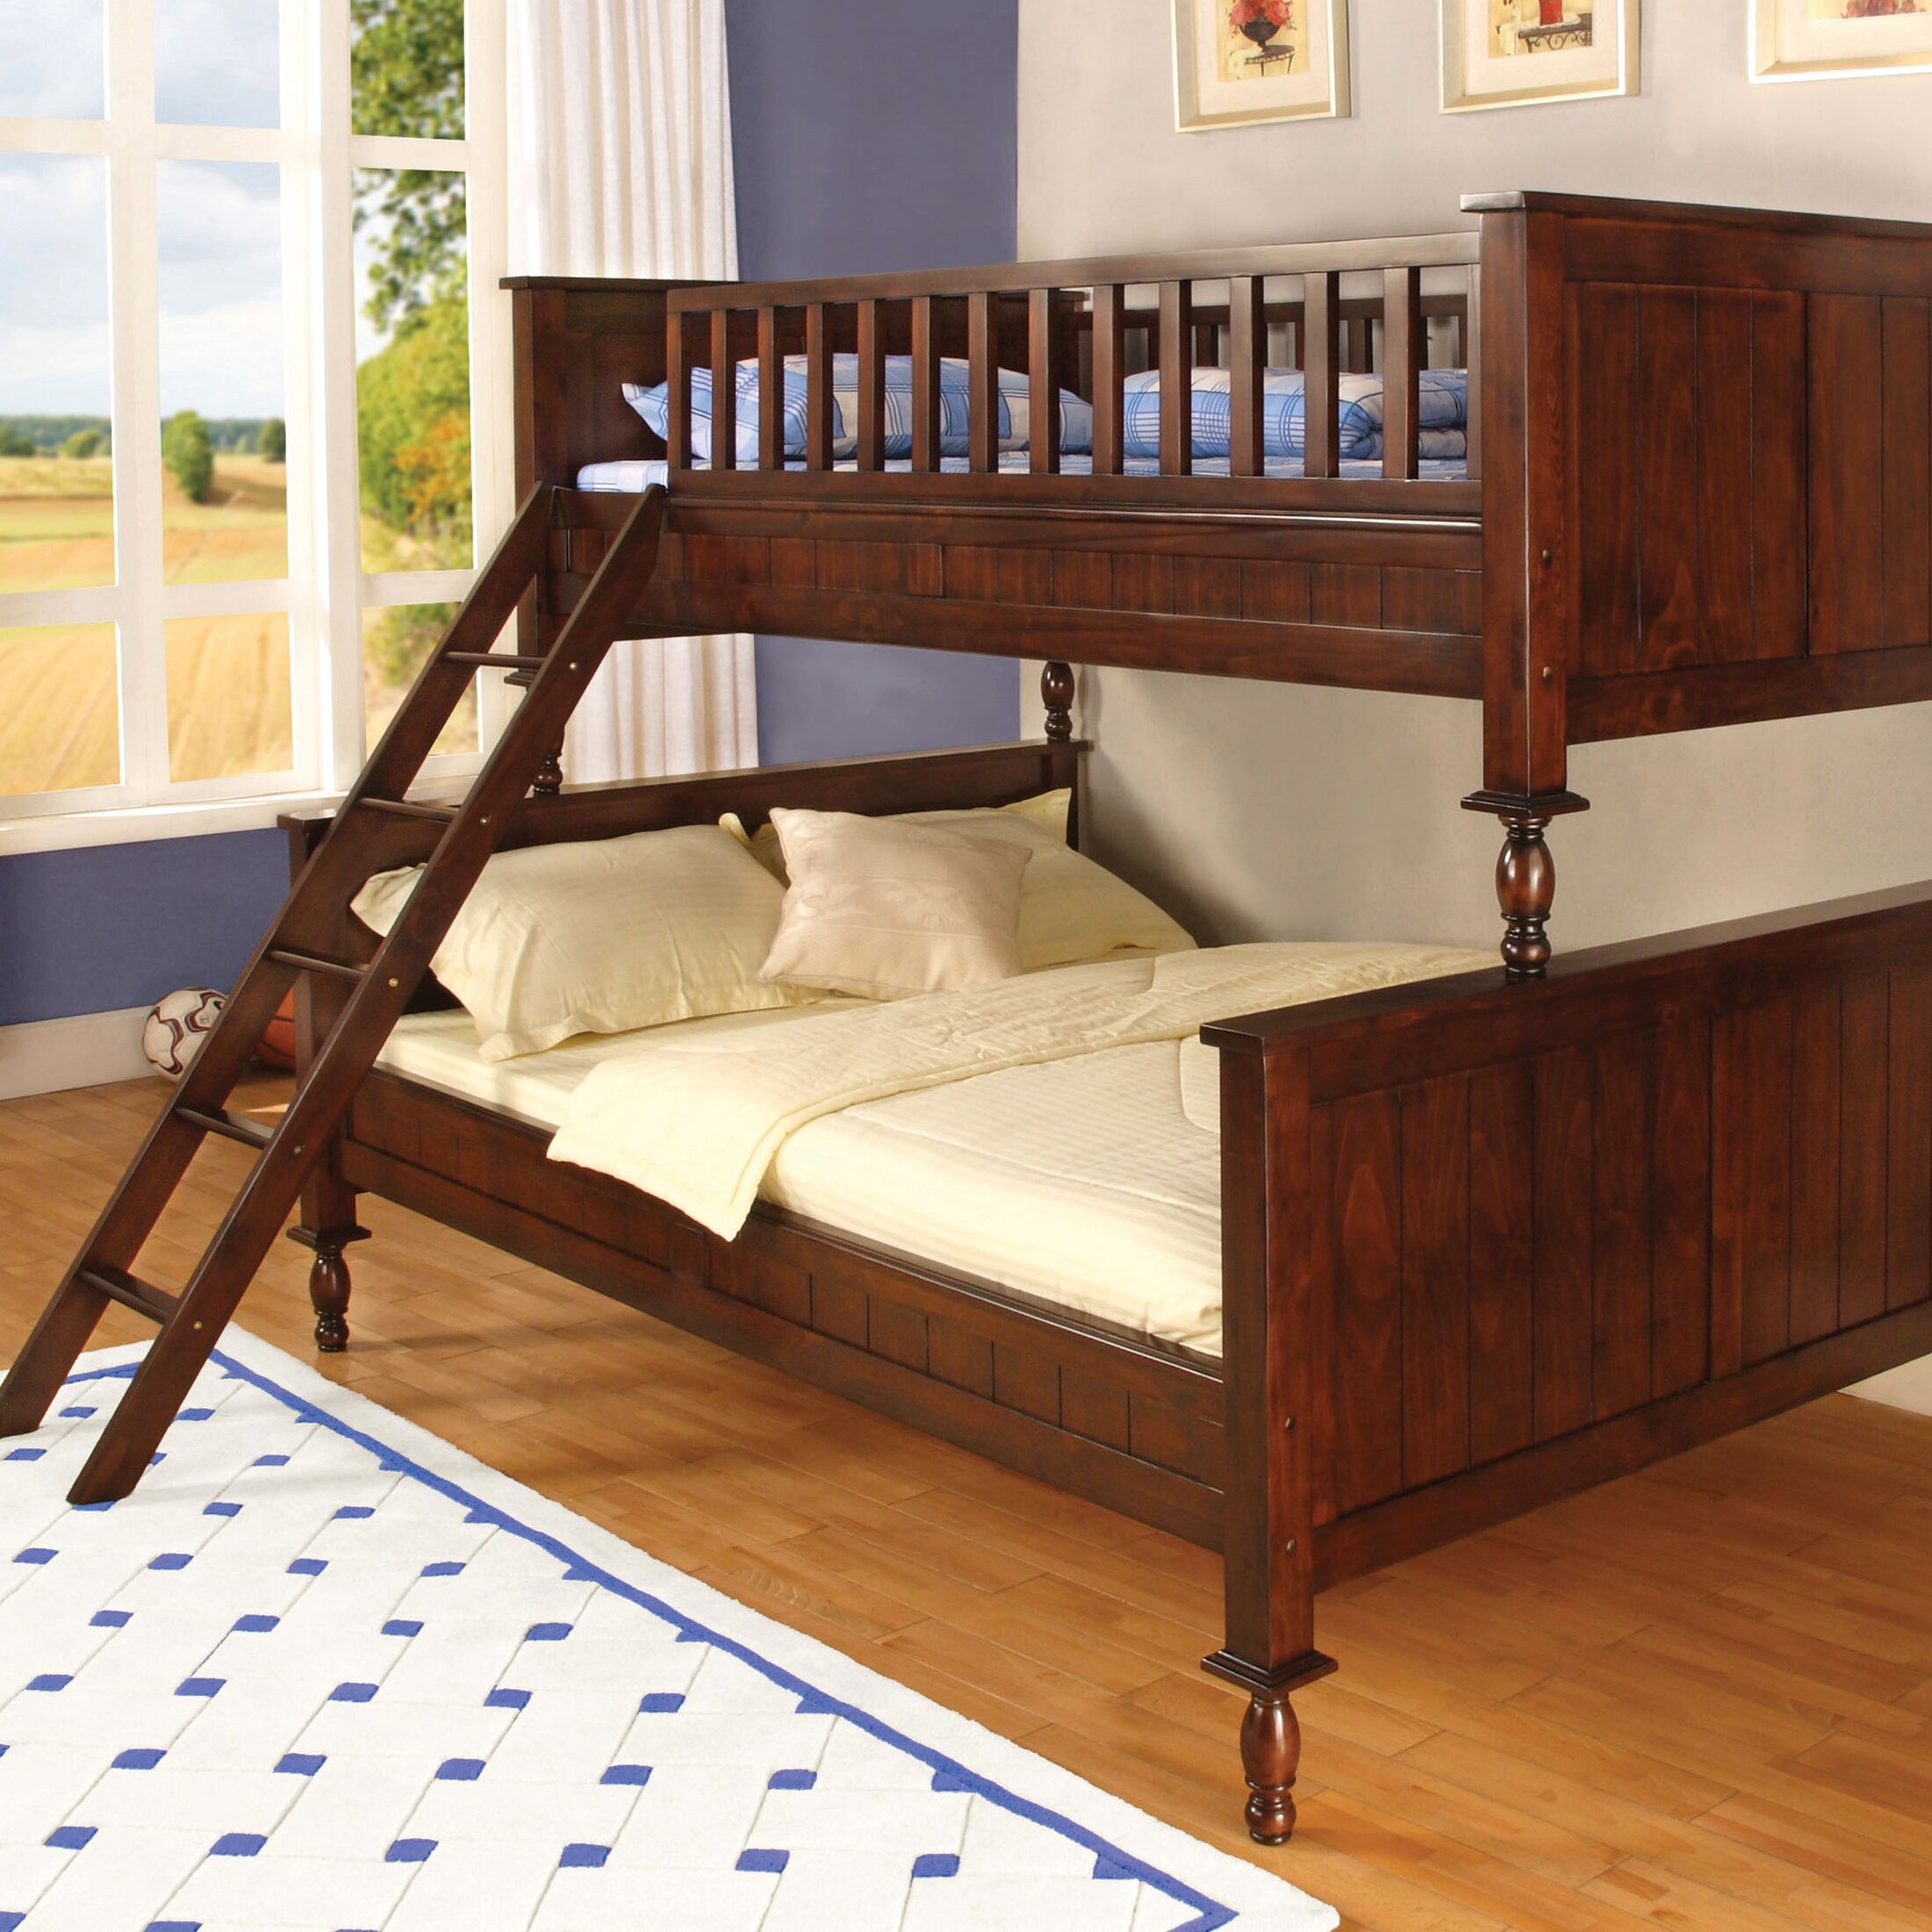 Full Over Futon Bunk Bed Visualhunt, Twin Over Futon Bunk Bed Wood